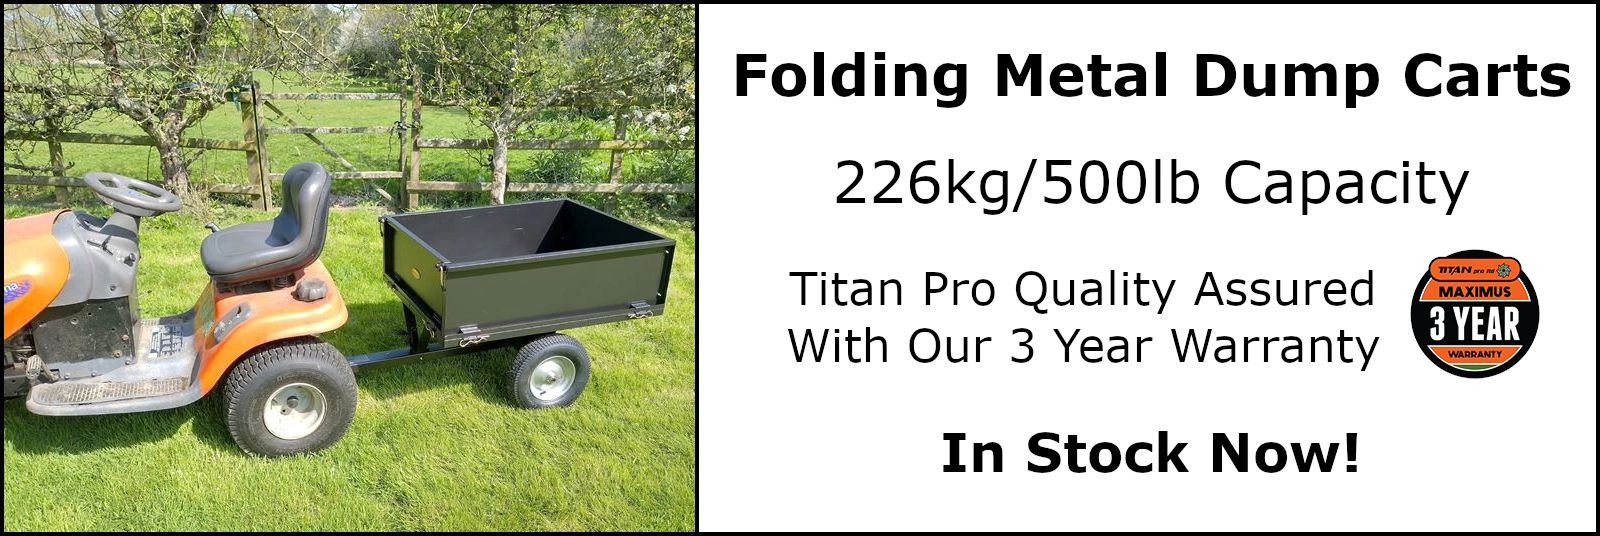 Folding Steel Tipping Trailers - Now In Stock